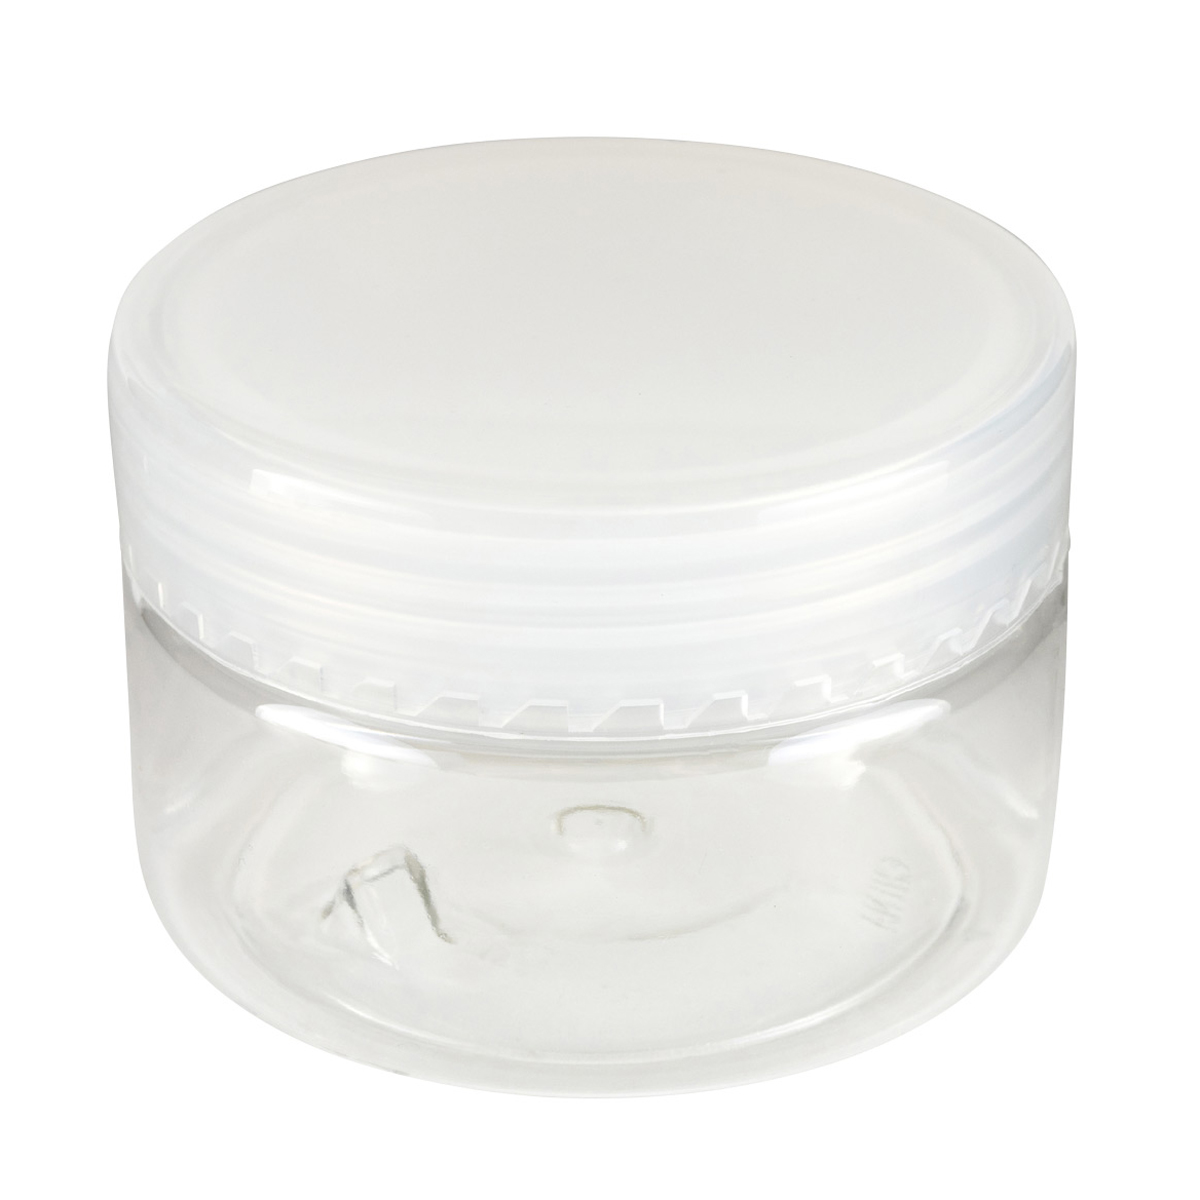 3 oz. Clear Travel Jar with Seal Insert | The Container Store